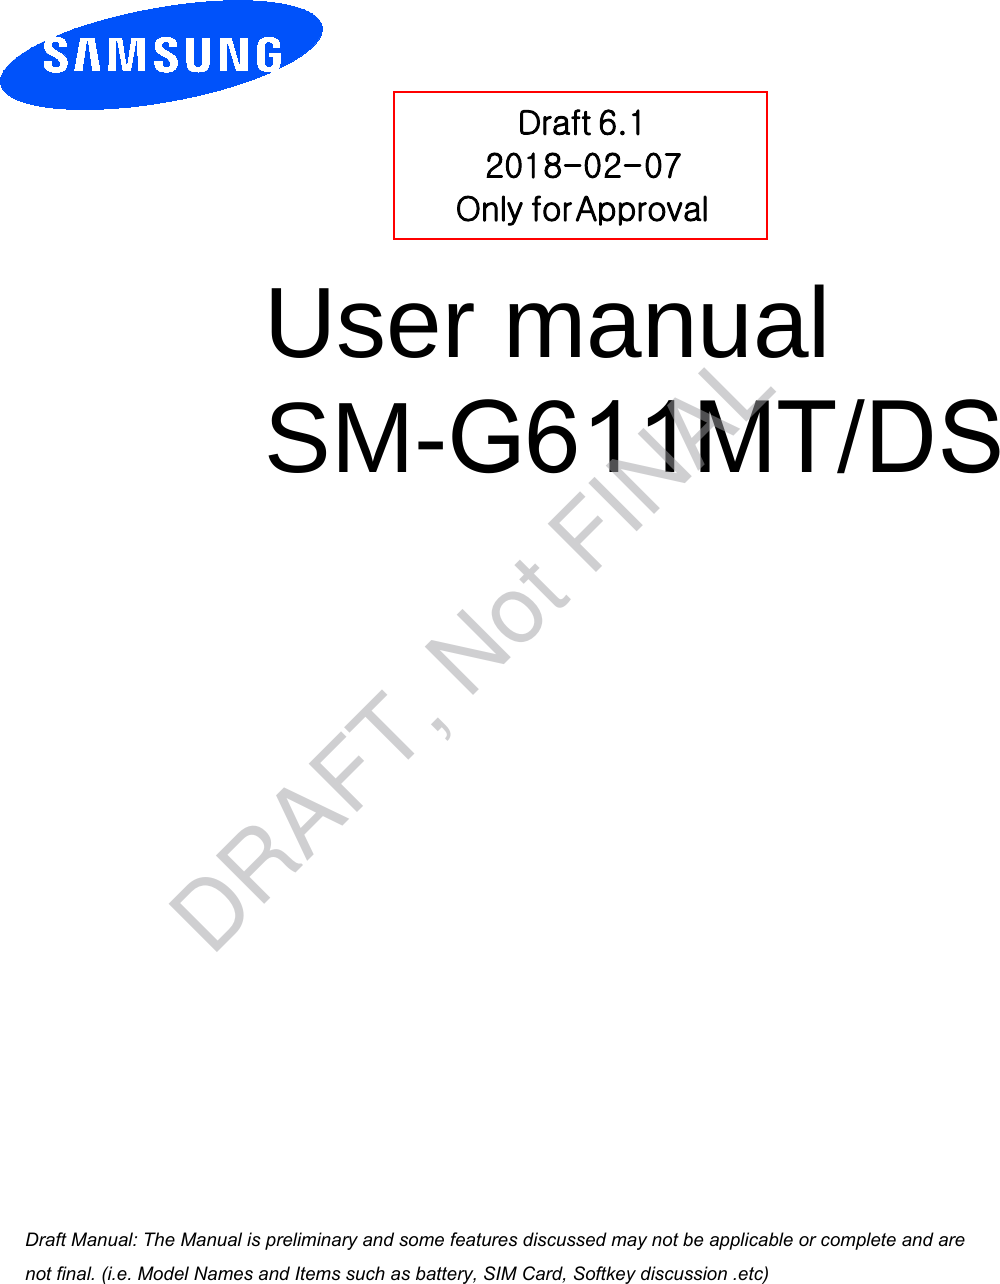 User manual SM-G611MT/DS  Draft 6.1 2018-02-07 Only for Approval a ana  ana  na and  a dd a n  aa   and a n na  d a and   a a  ad  dn DRAFT, Not FINAL